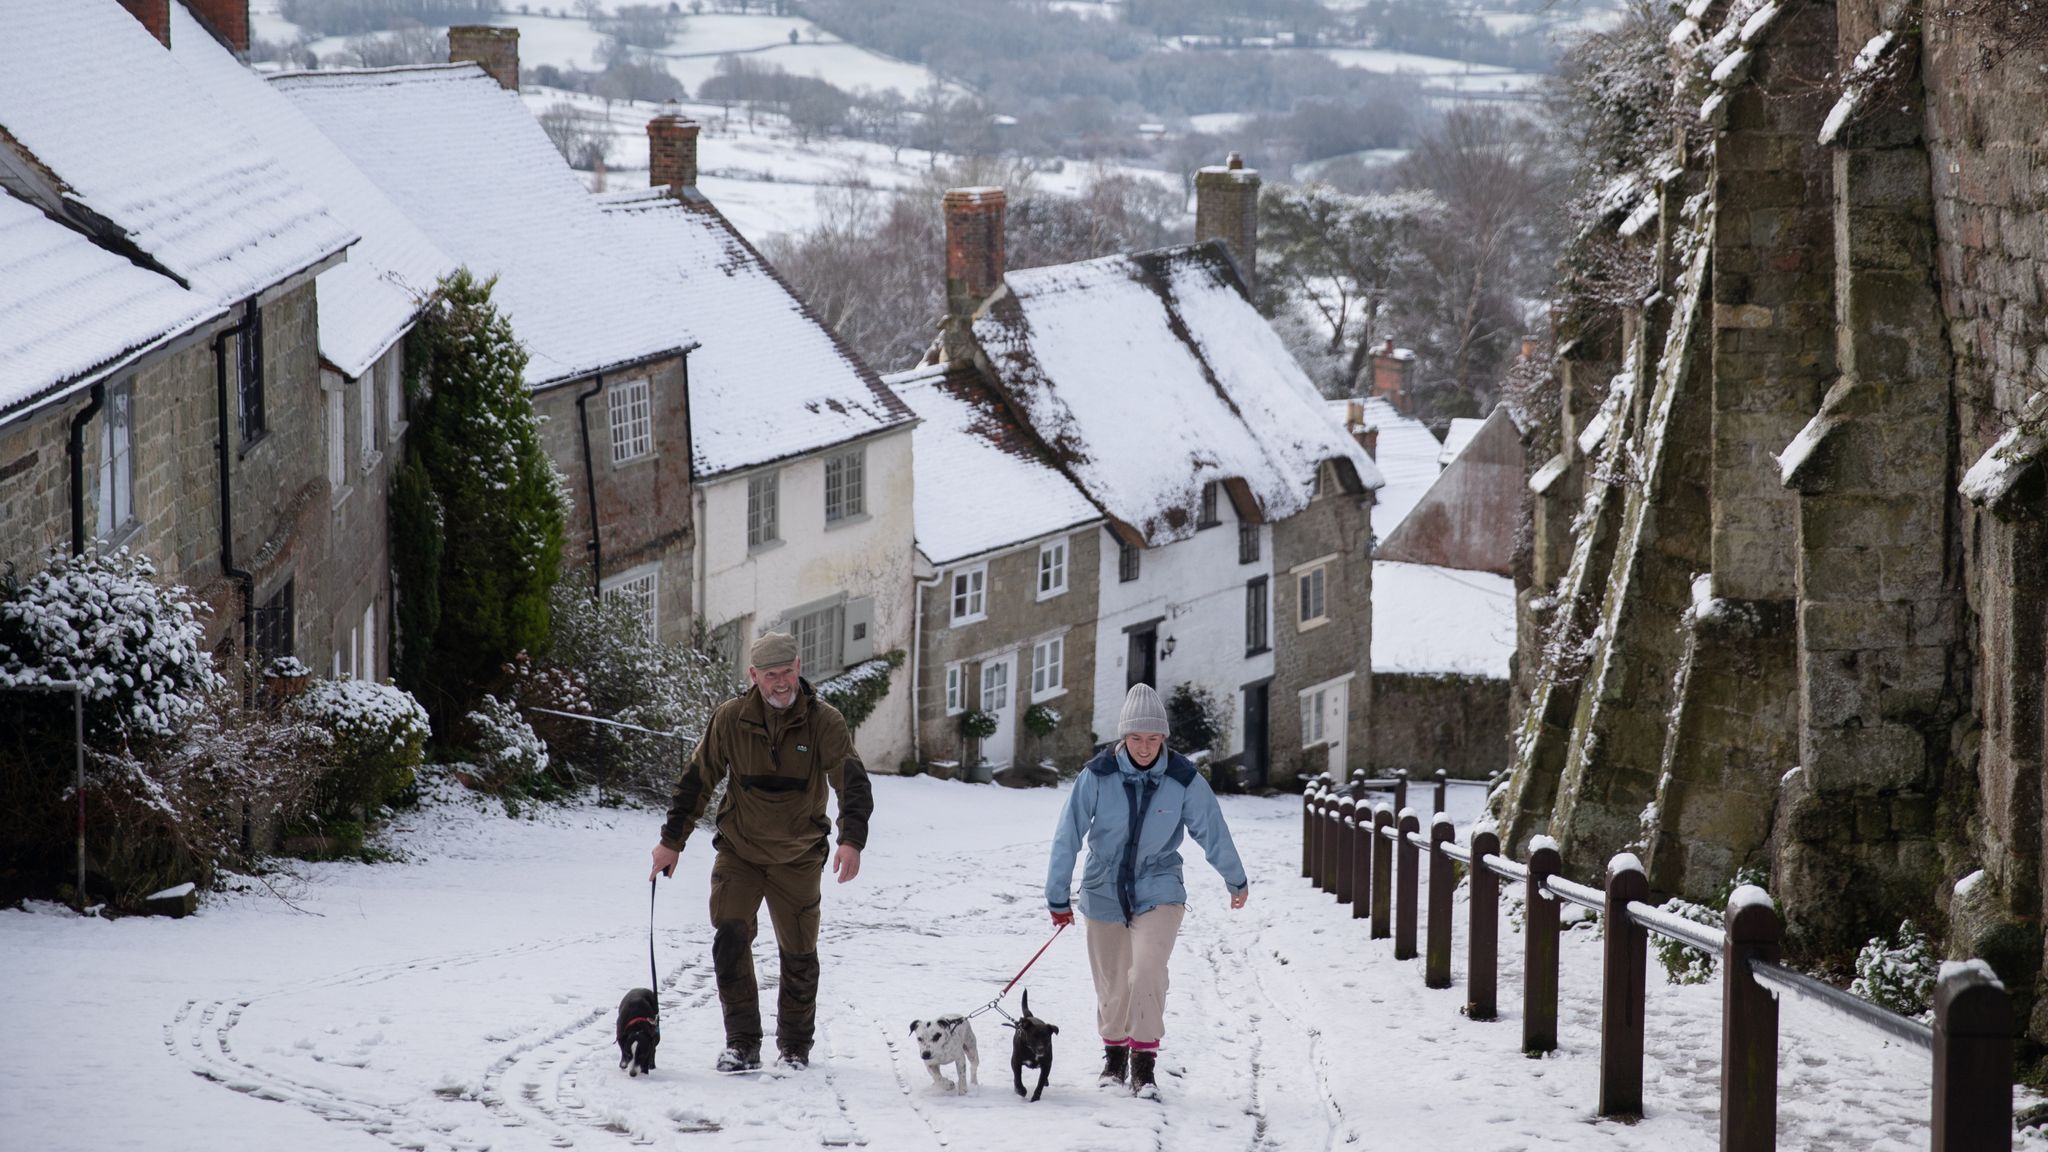 UK weather Storm Darcy heads to England bringing 'up to 20cm' of snow